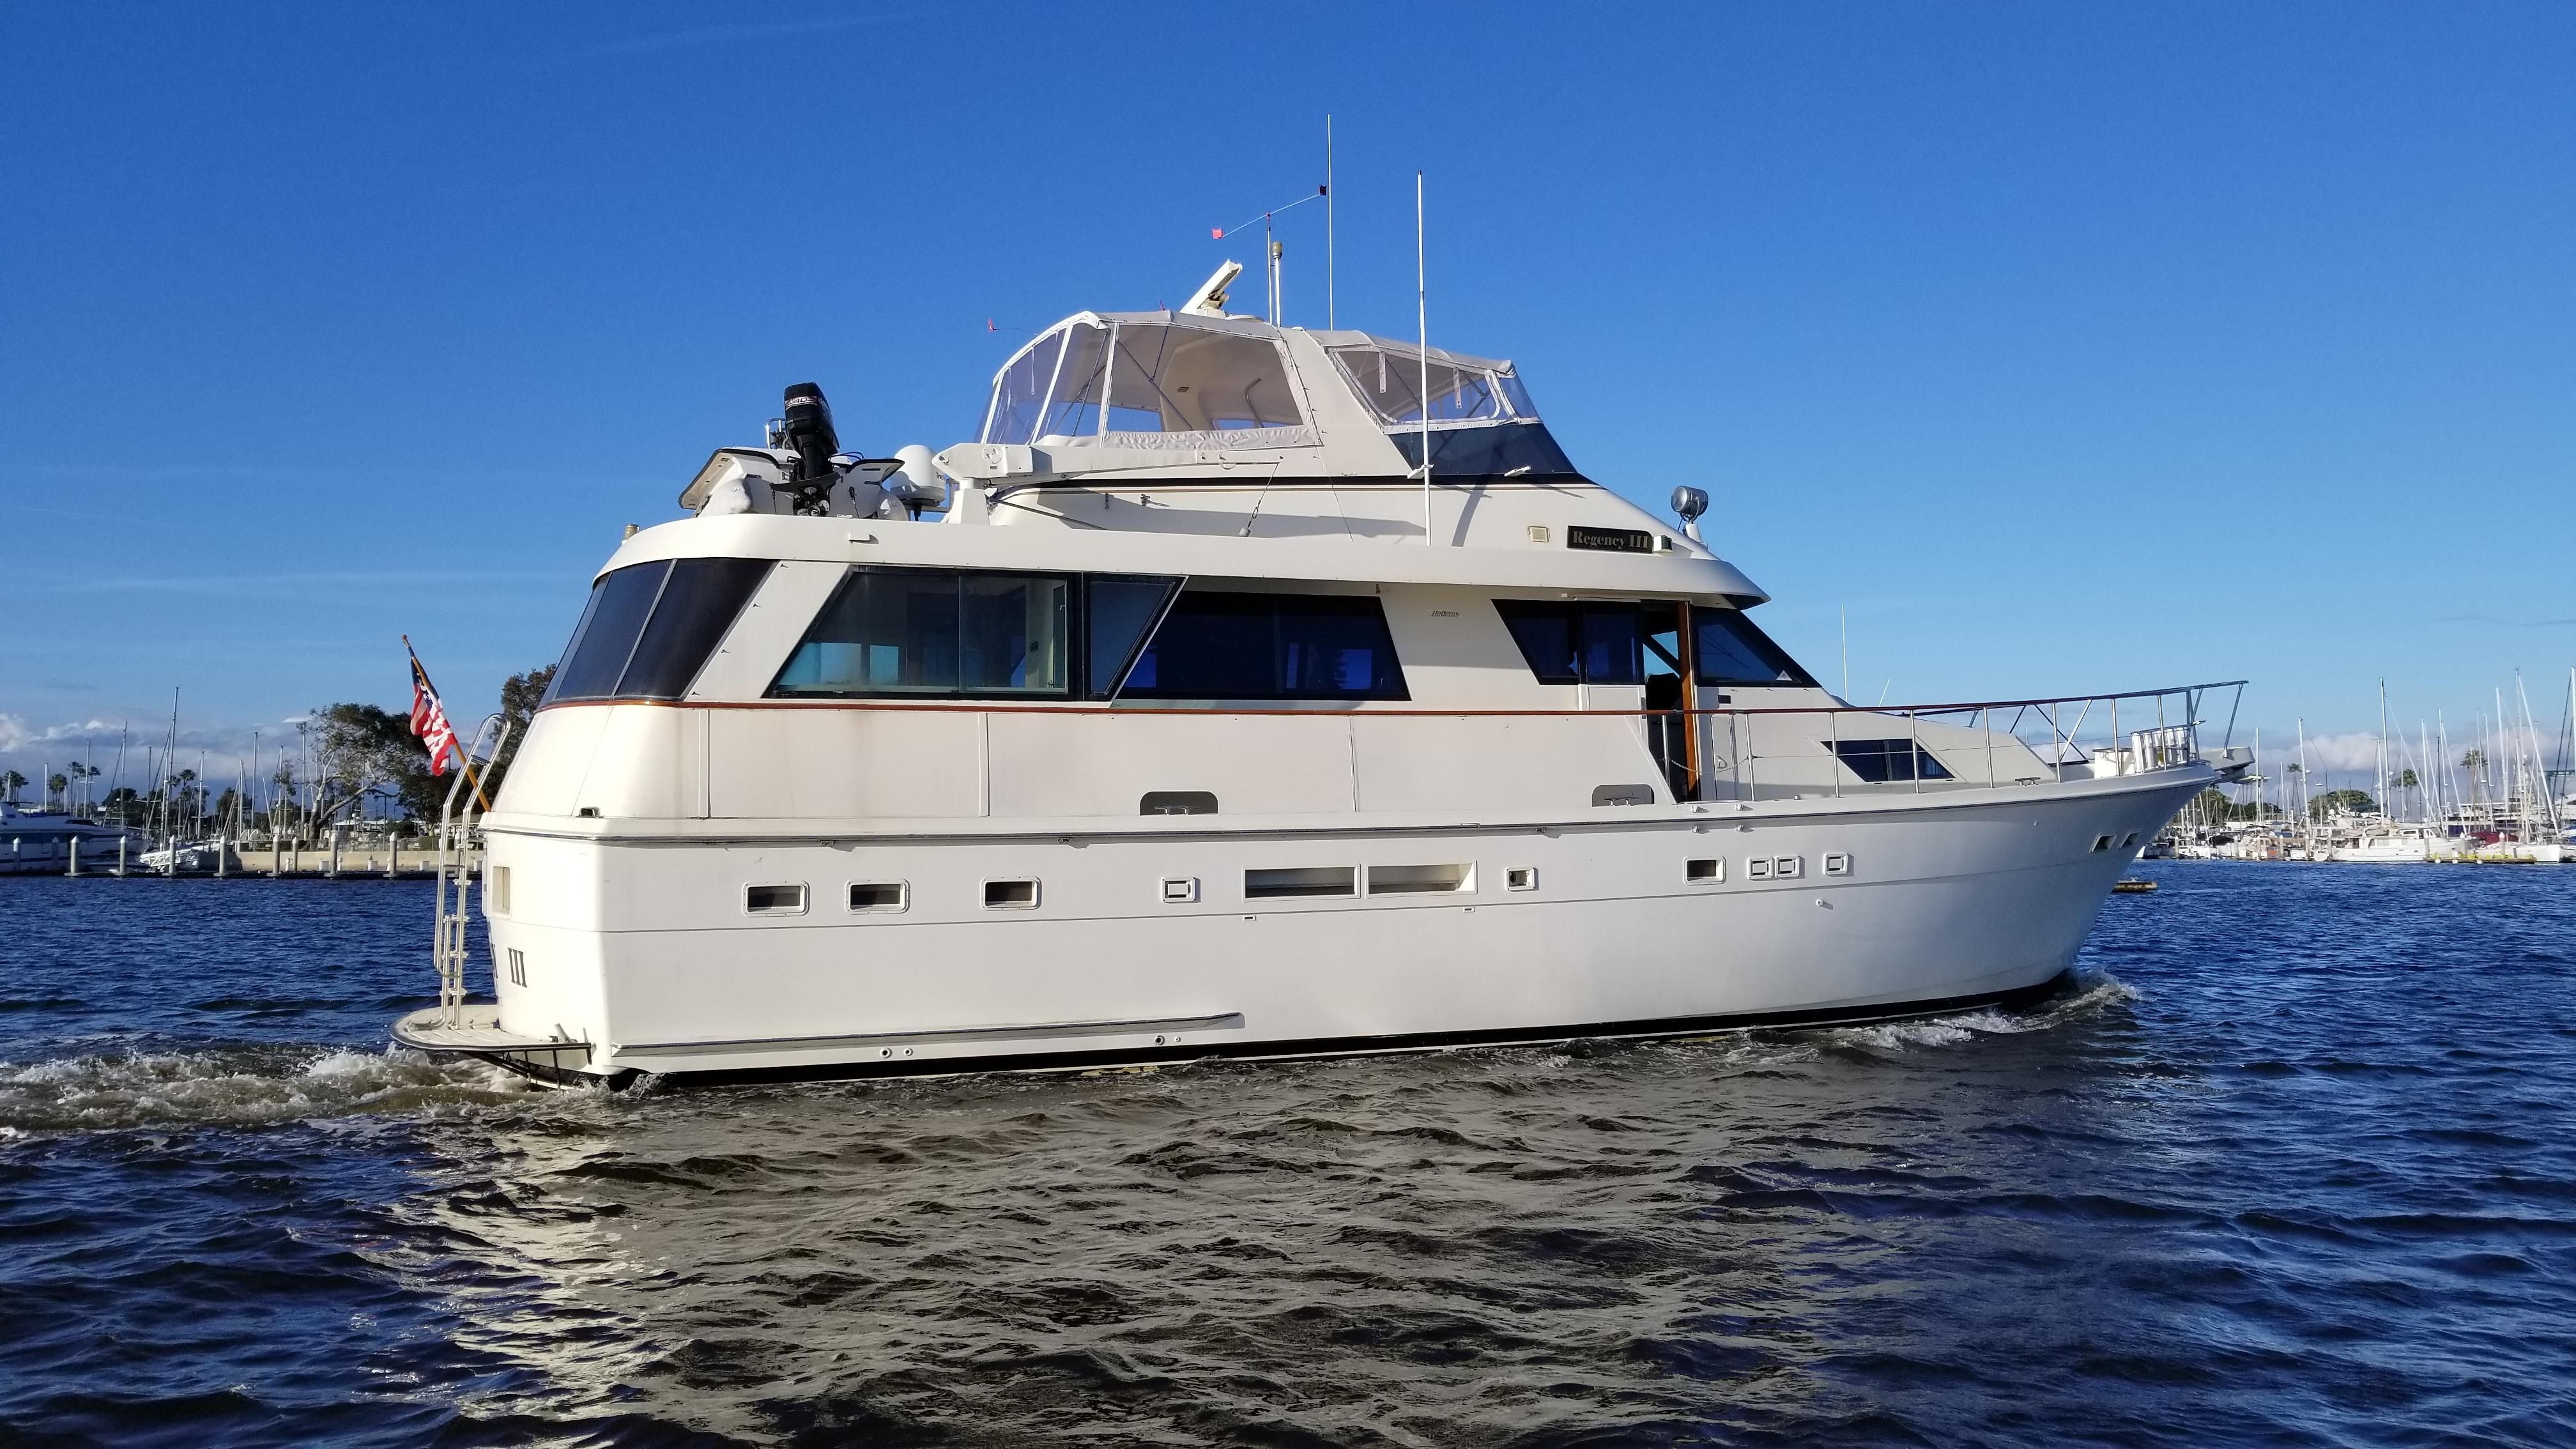 60 foot motor yachts for sale